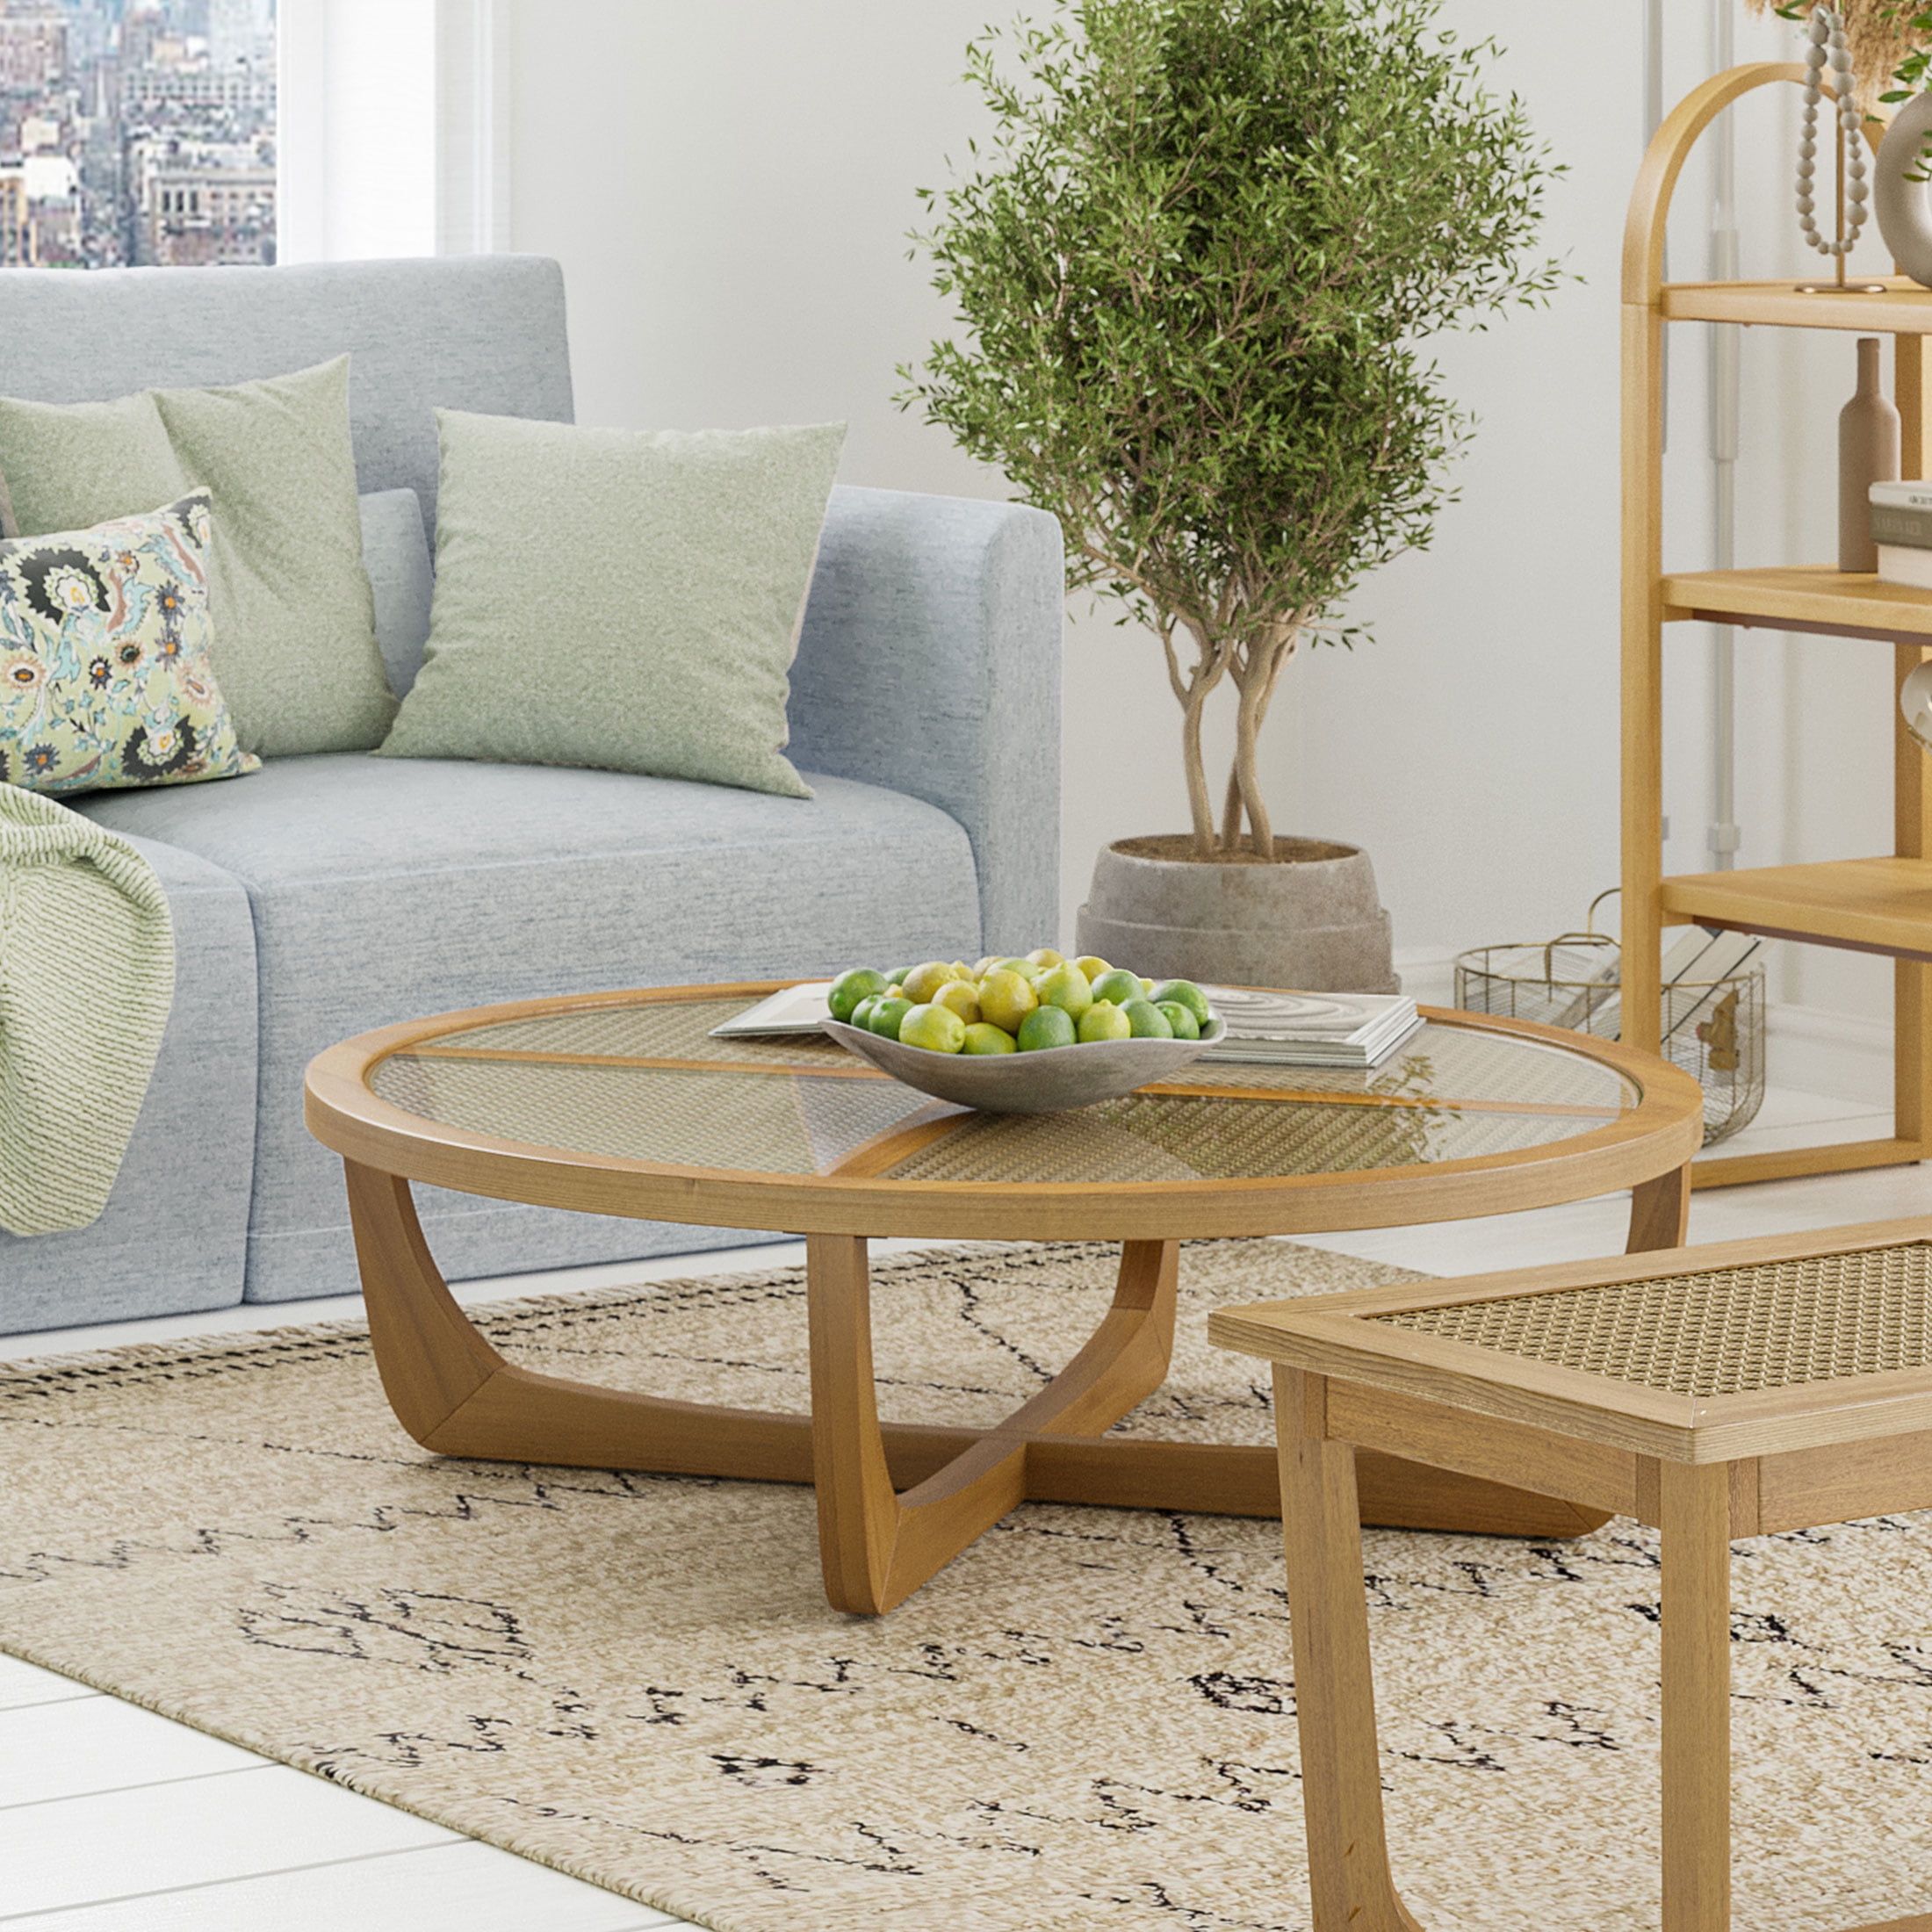 Beautiful Rattan & Glass Coffee Table With Solid Wood Framedrew  Barrymore – Walmart In Rattan Coffee Tables (View 14 of 15)